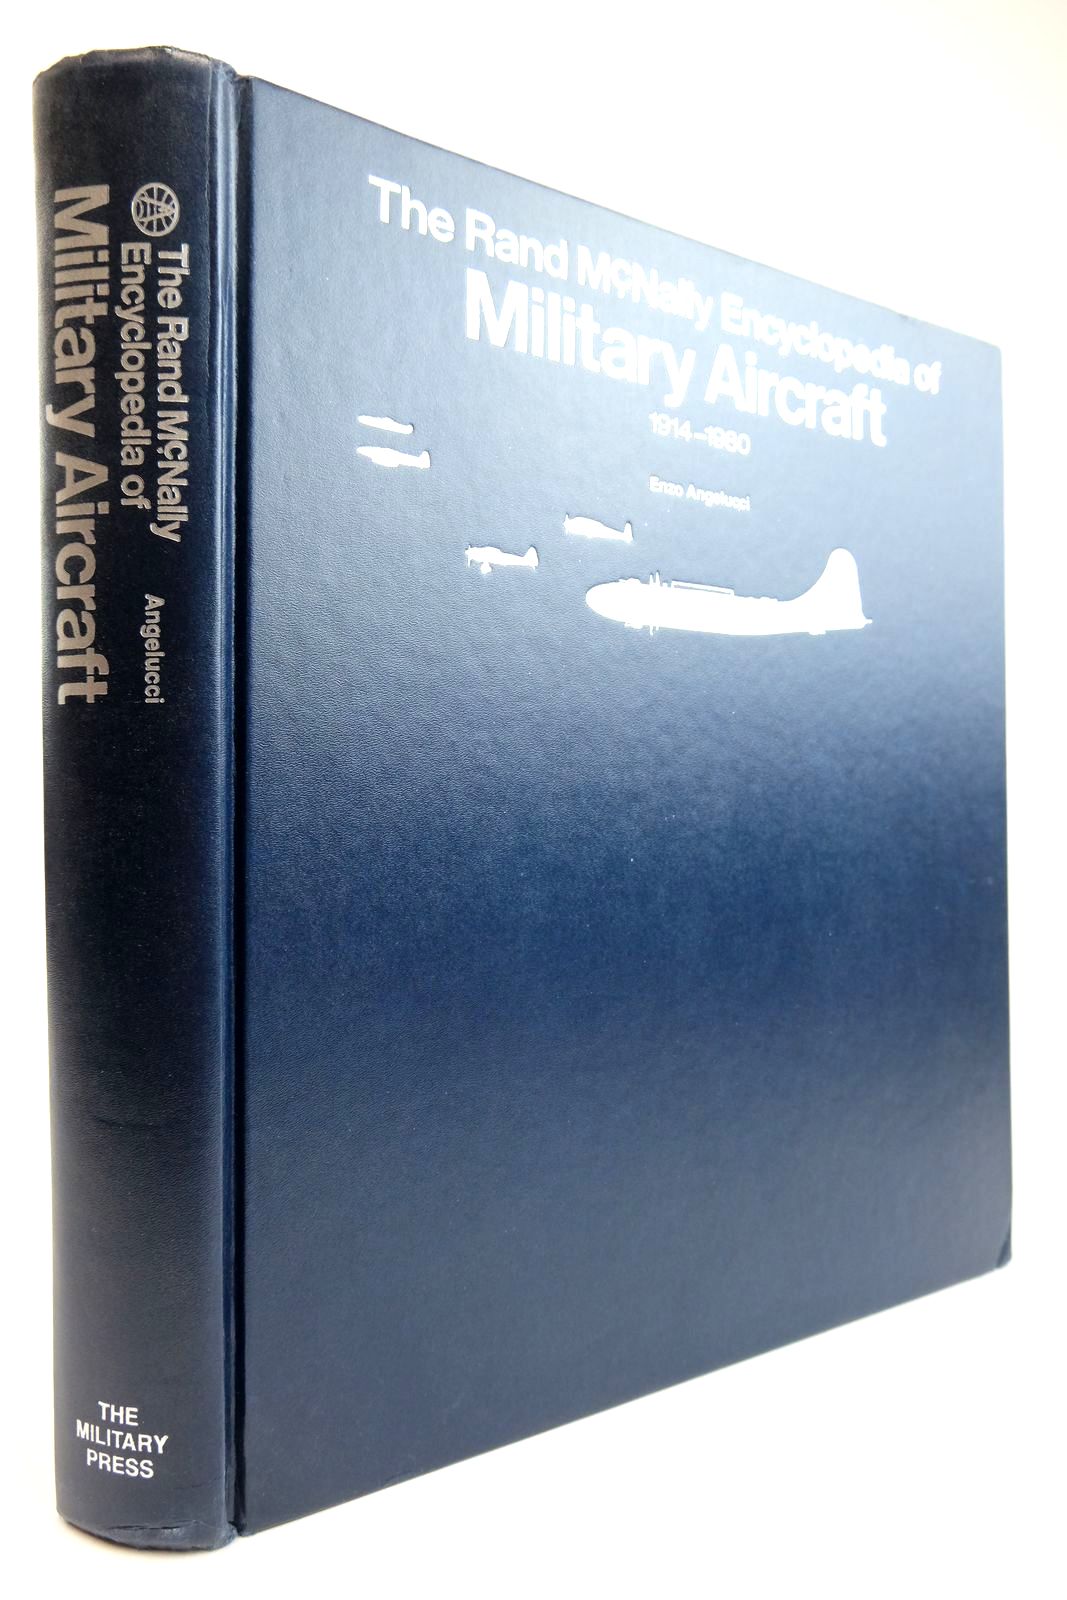 Photo of THE RAND MCNALLY ENCYCLOPEDIA OF MILITARY AIRCRAFT 1914-1980 written by Angelucci, Enzo
Matricardi, Paolo published by The Military Press (STOCK CODE: 2133766)  for sale by Stella & Rose's Books